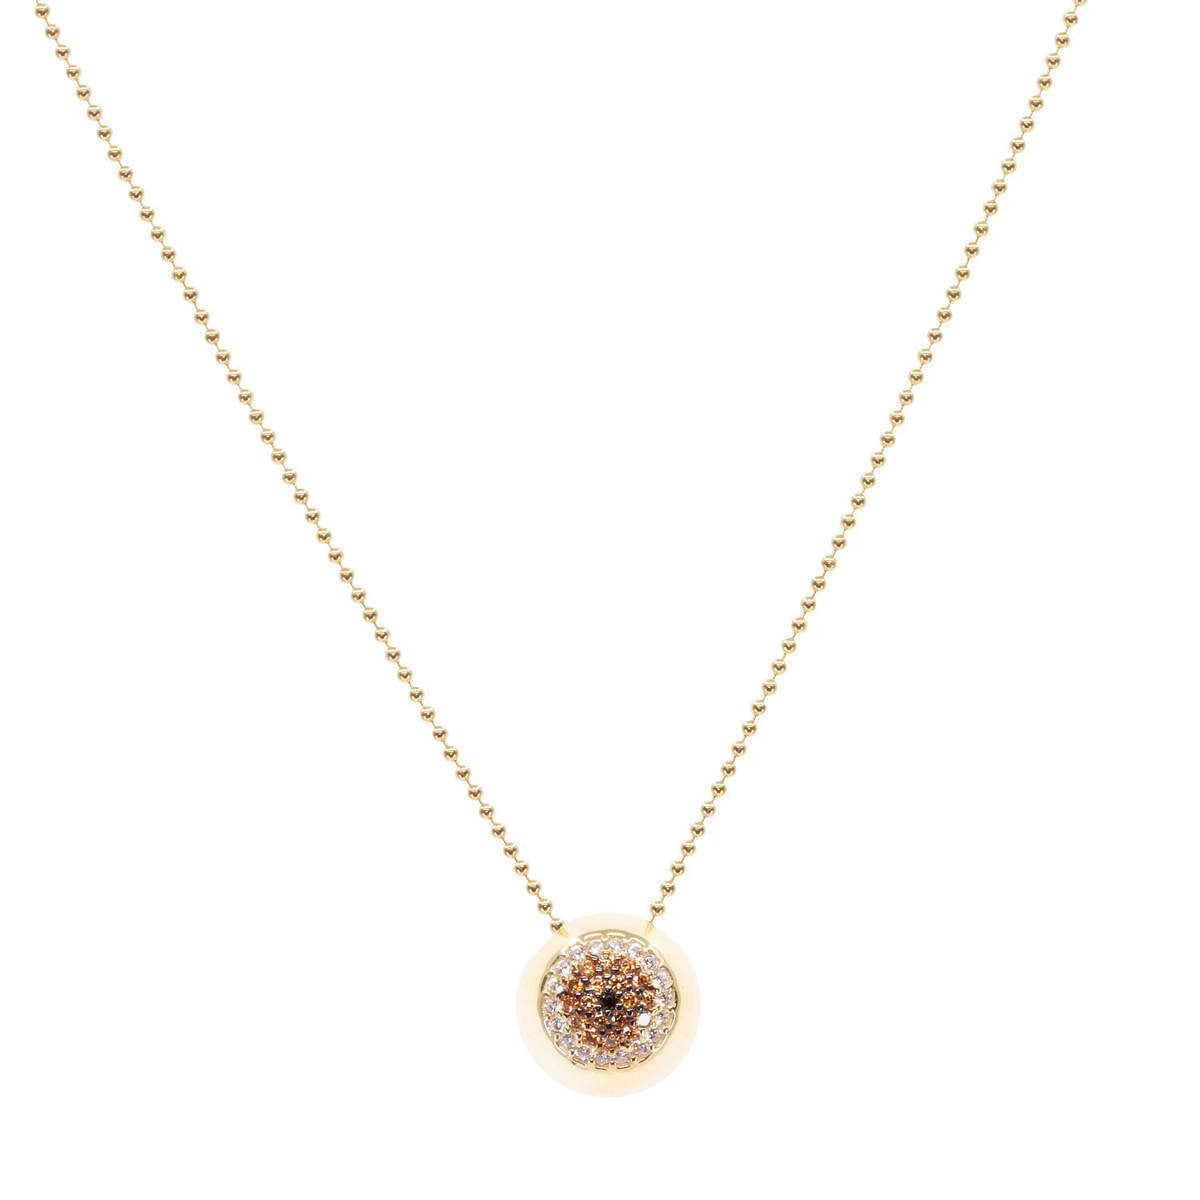 Wide-Eyed Crystal Pavé Necklace in Warm Topaz